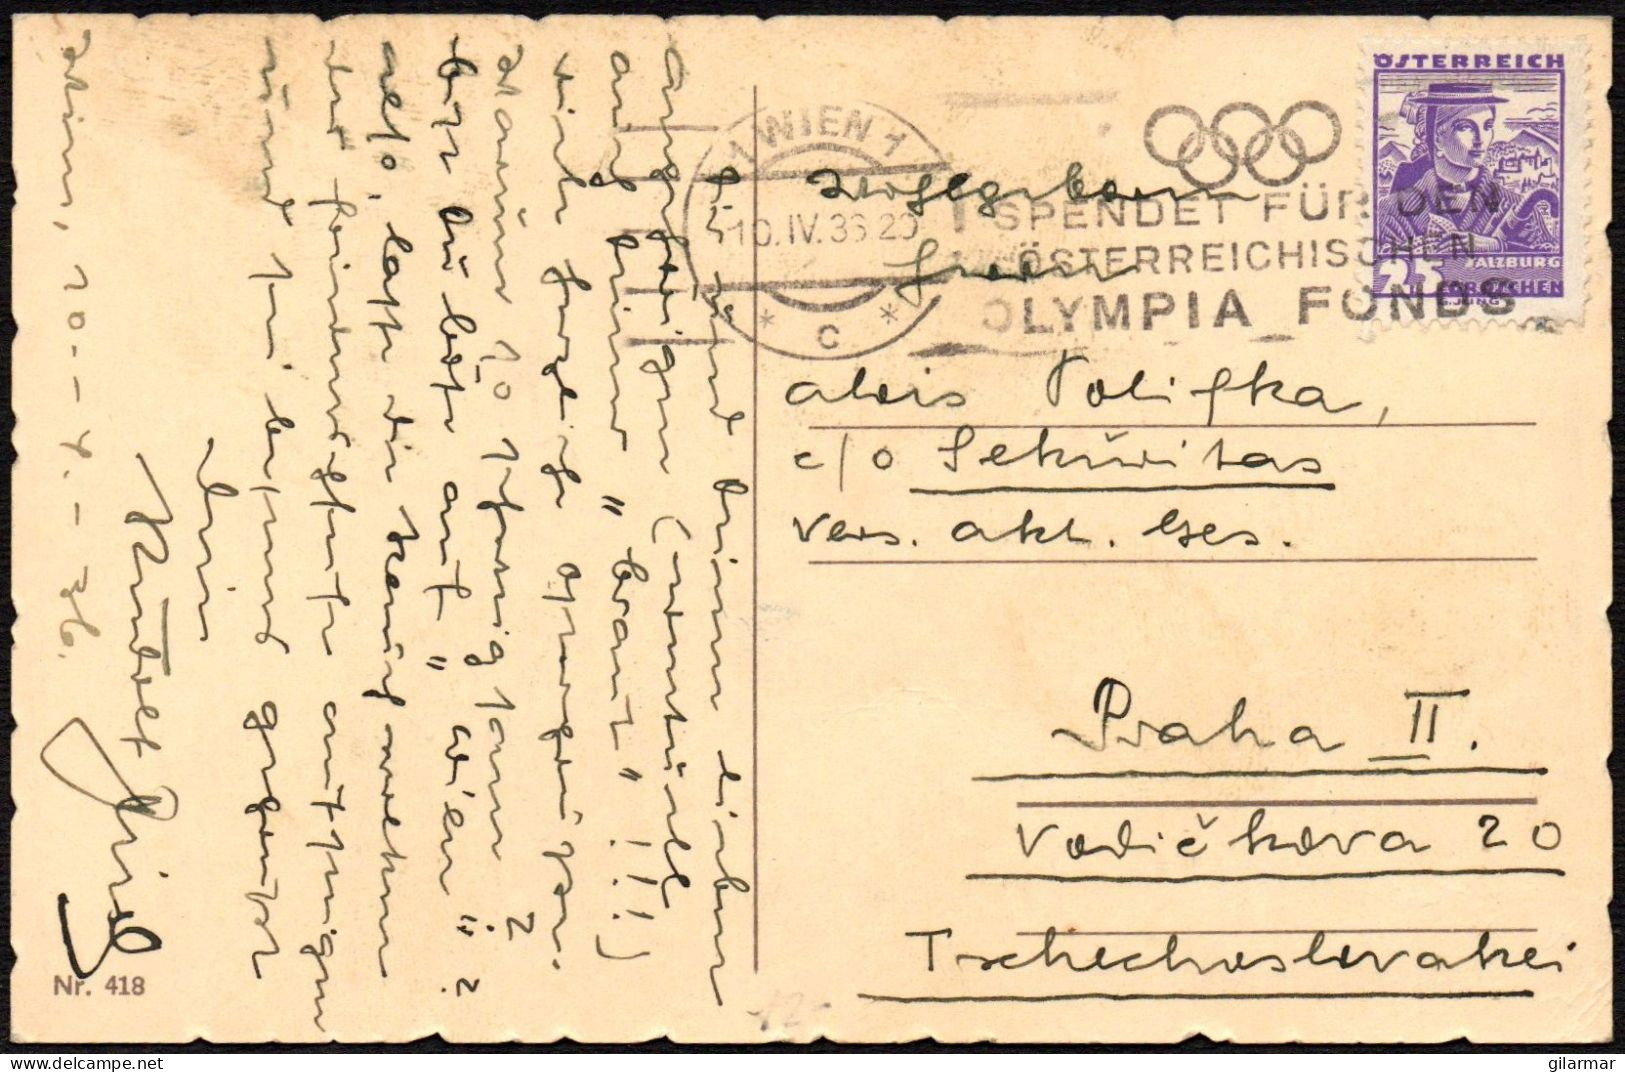 OLYMPIC GAMES 1936 - AUSTRIA WIEN 1 C 1935 - DONATE TO THE AUSTRIAN OLYMPIC FUND - MAILED POSTCARD - M - Sommer 1936: Berlin